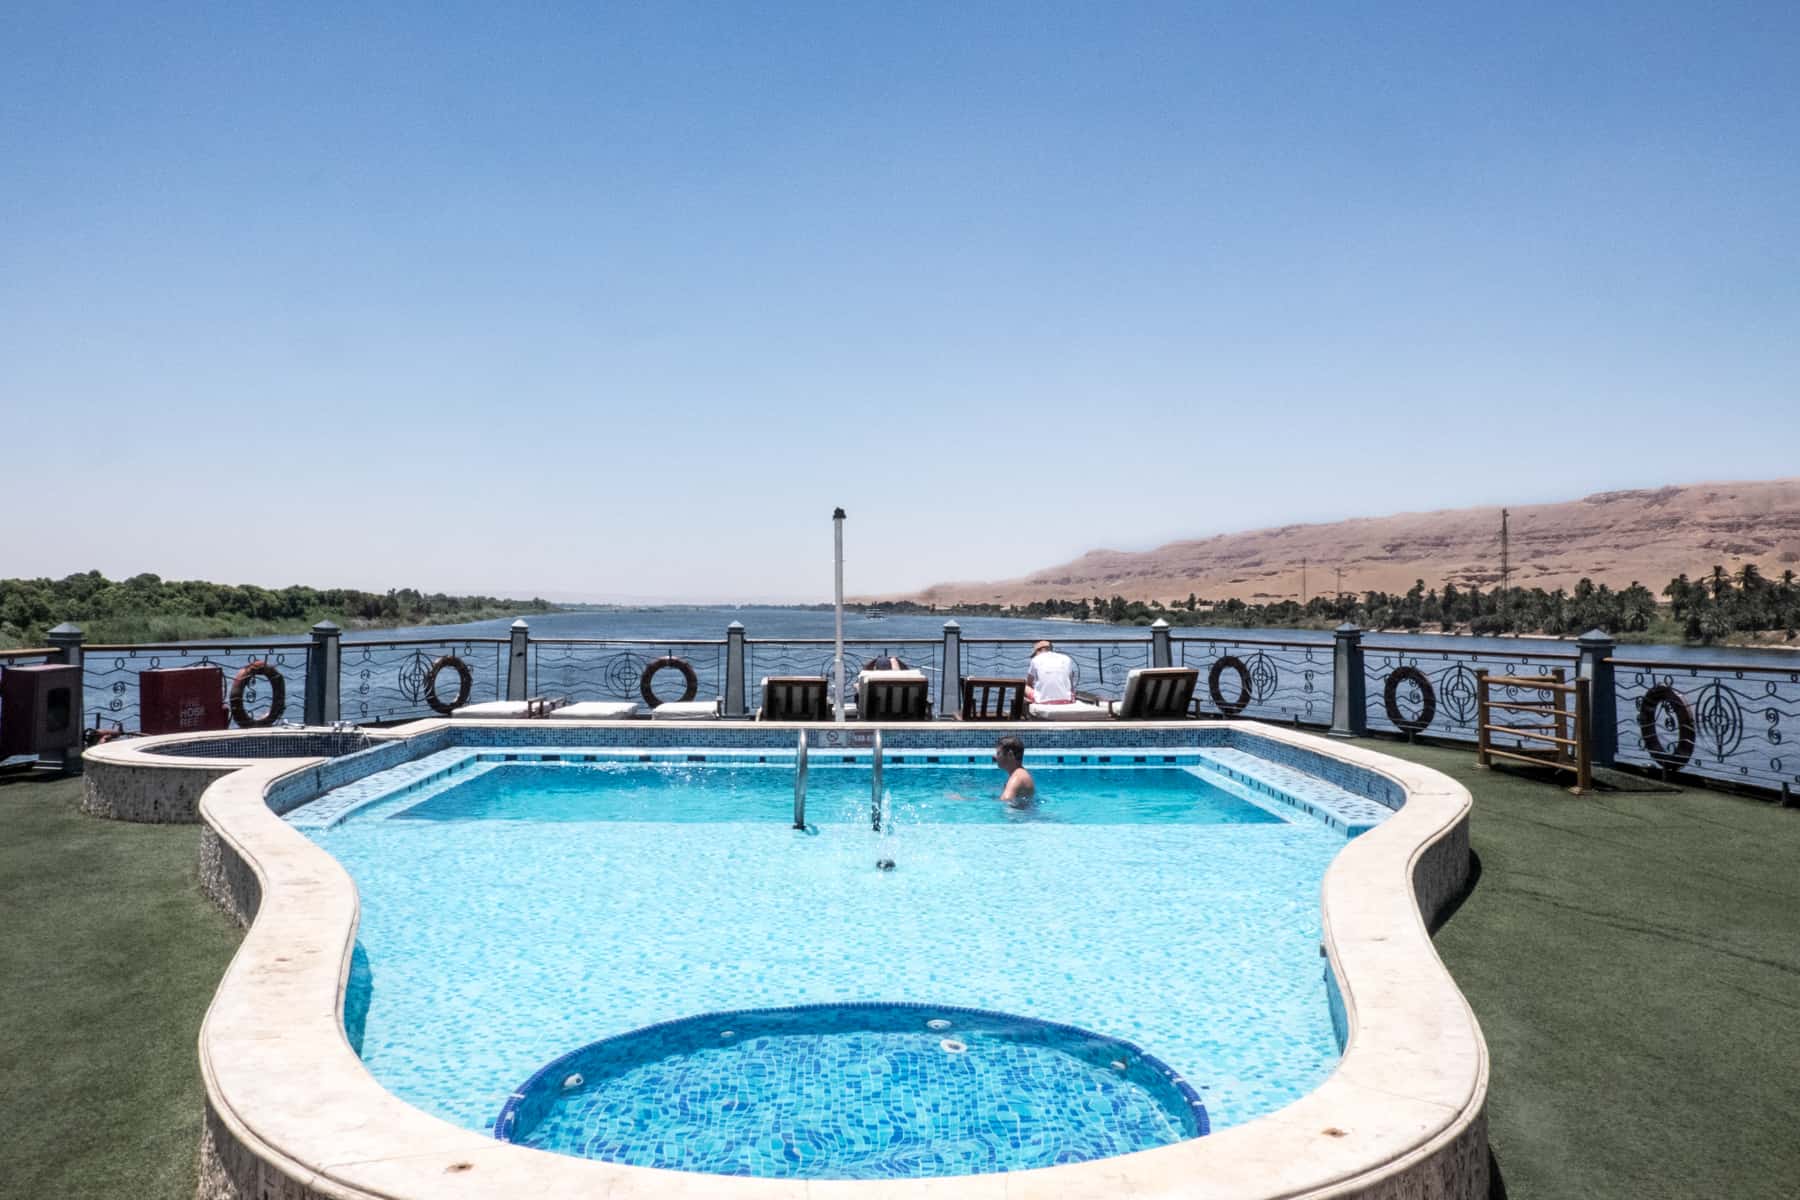 A swimming pool on the top deck of a nile cruise boat in Egypt, with the Nile River rock formations in the background